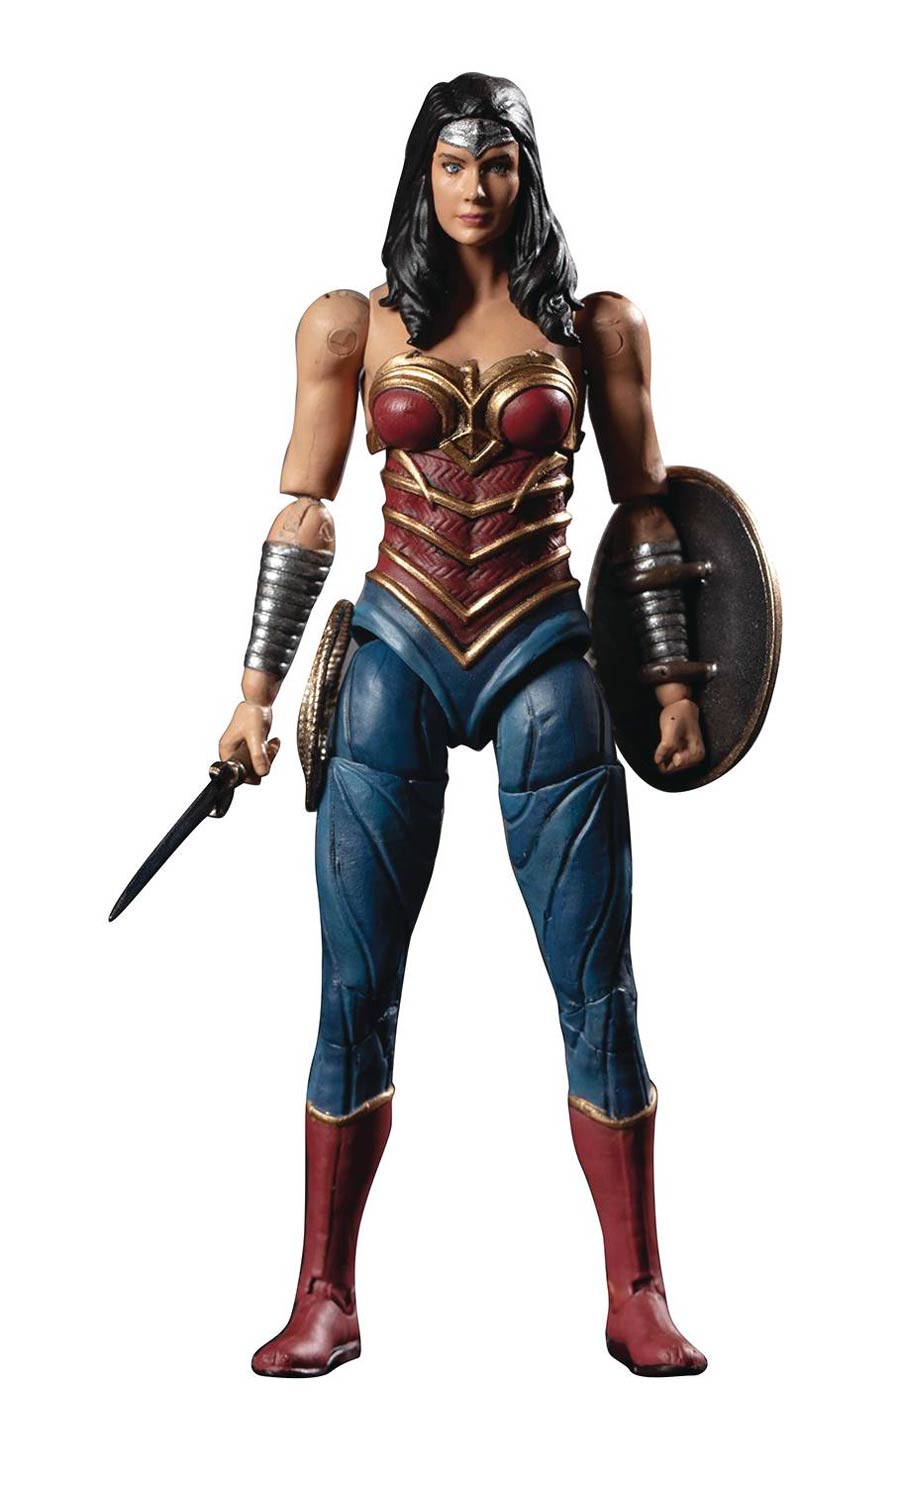 Injustice 2 Wonder Woman Previews Exclusive 1/18 Scale Action Figure